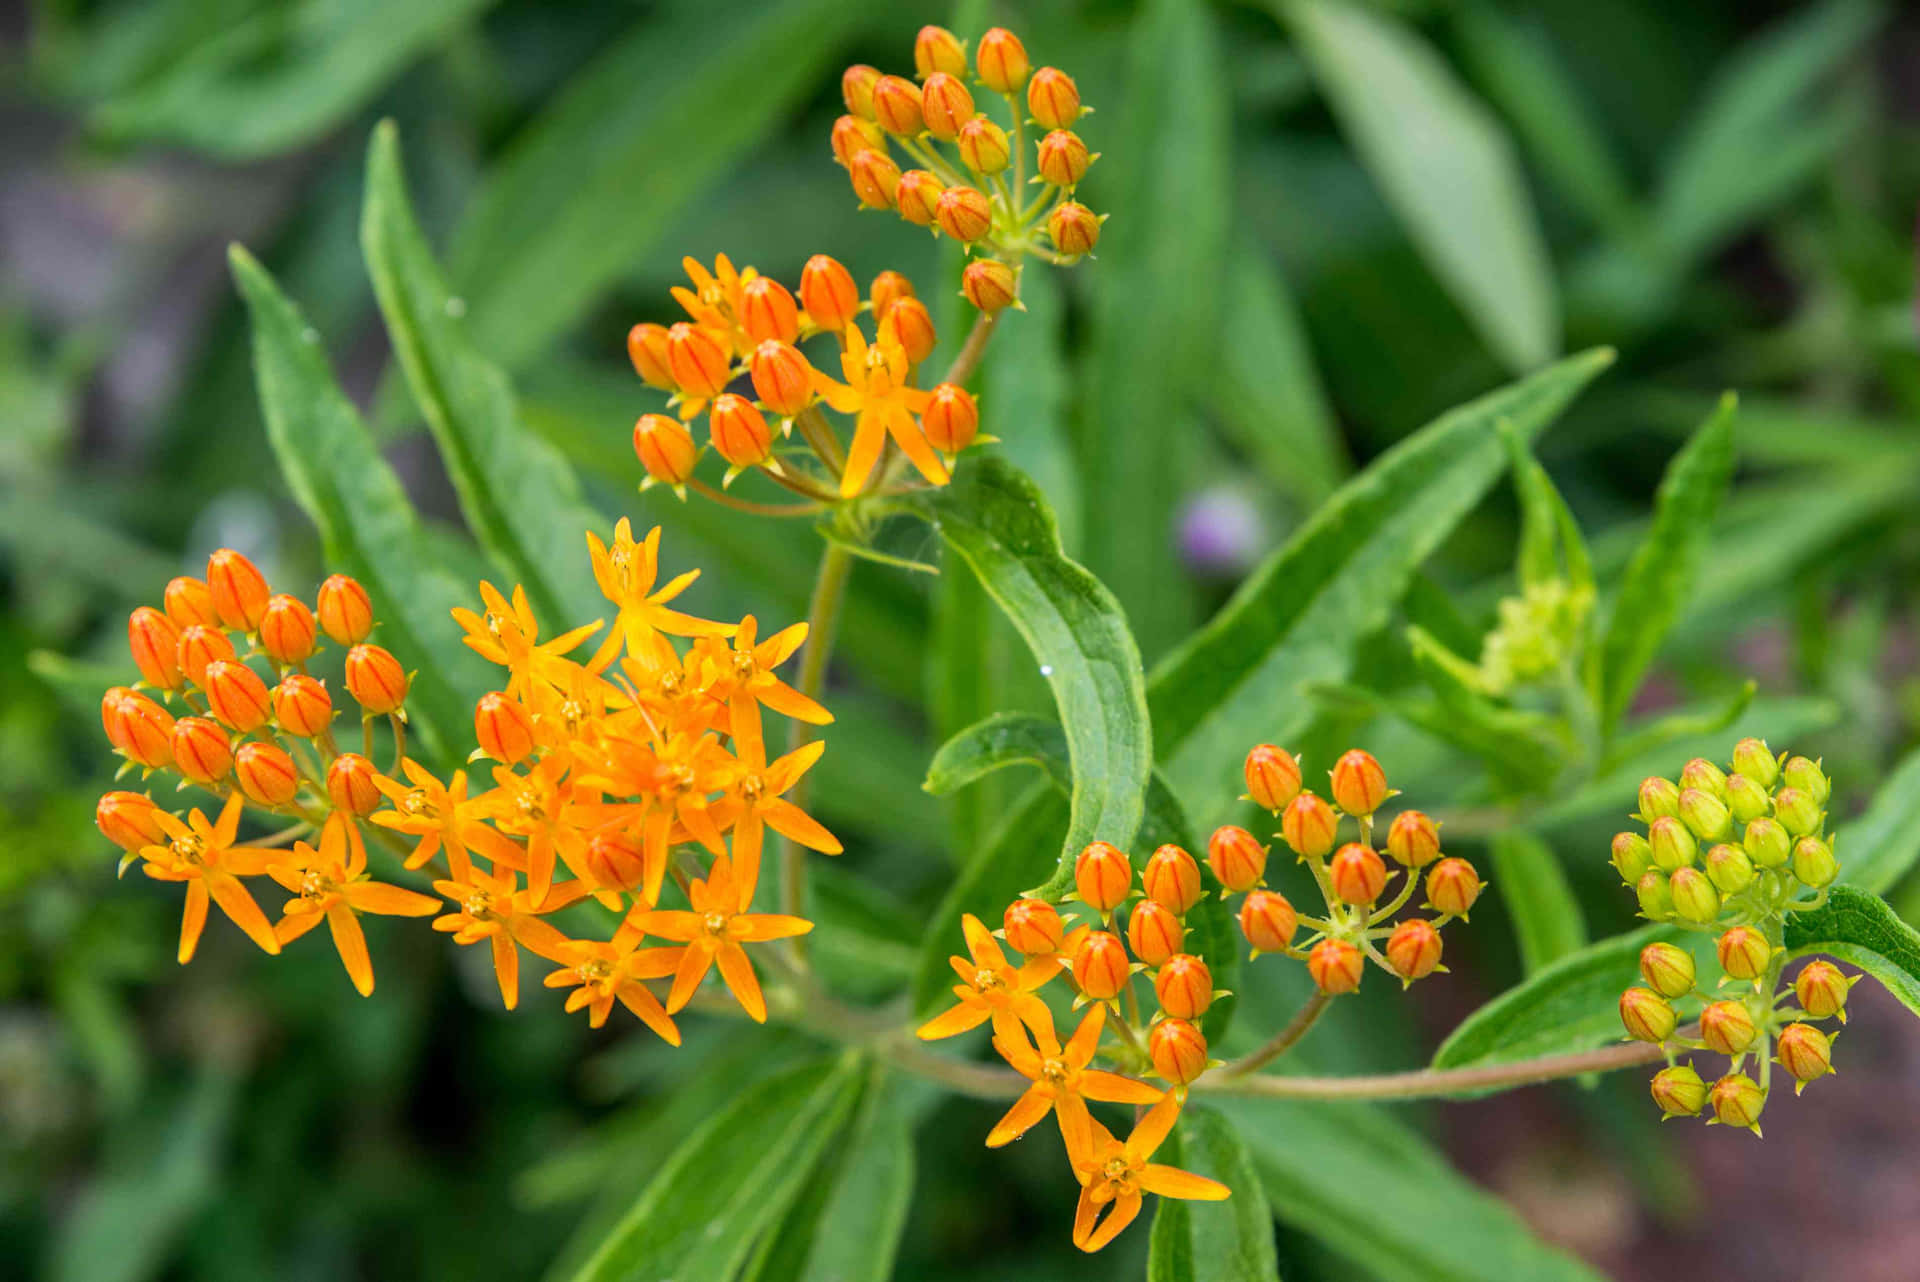 Showy yellow and orange blooms of the butterfly weed wild flower are an eye-catching addition to any garden Wallpaper